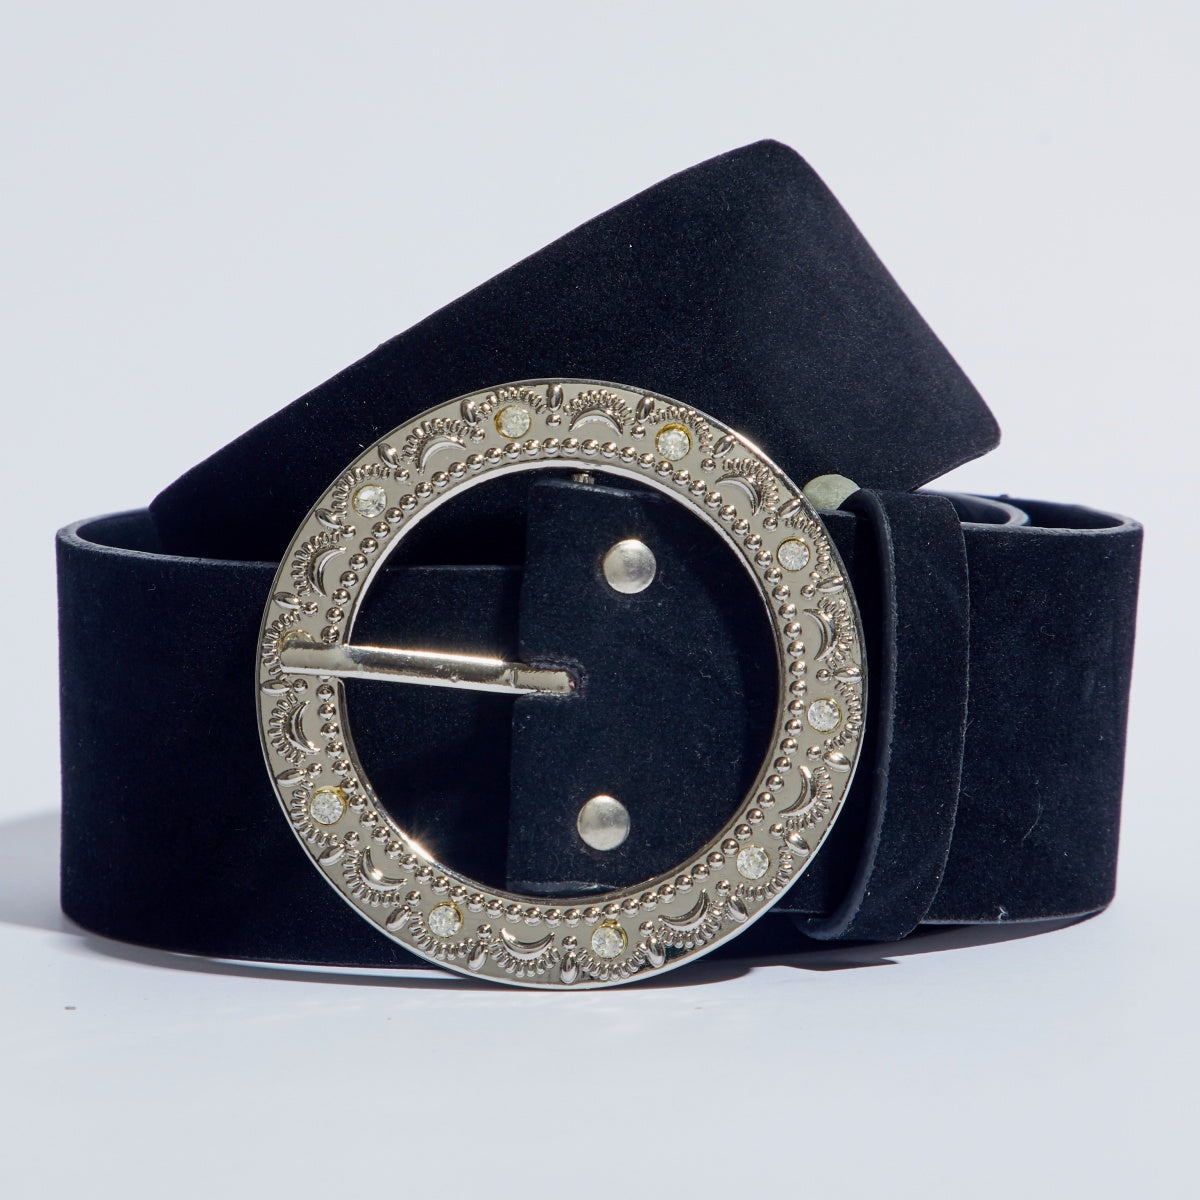 The Classy Thick Belt by Madish